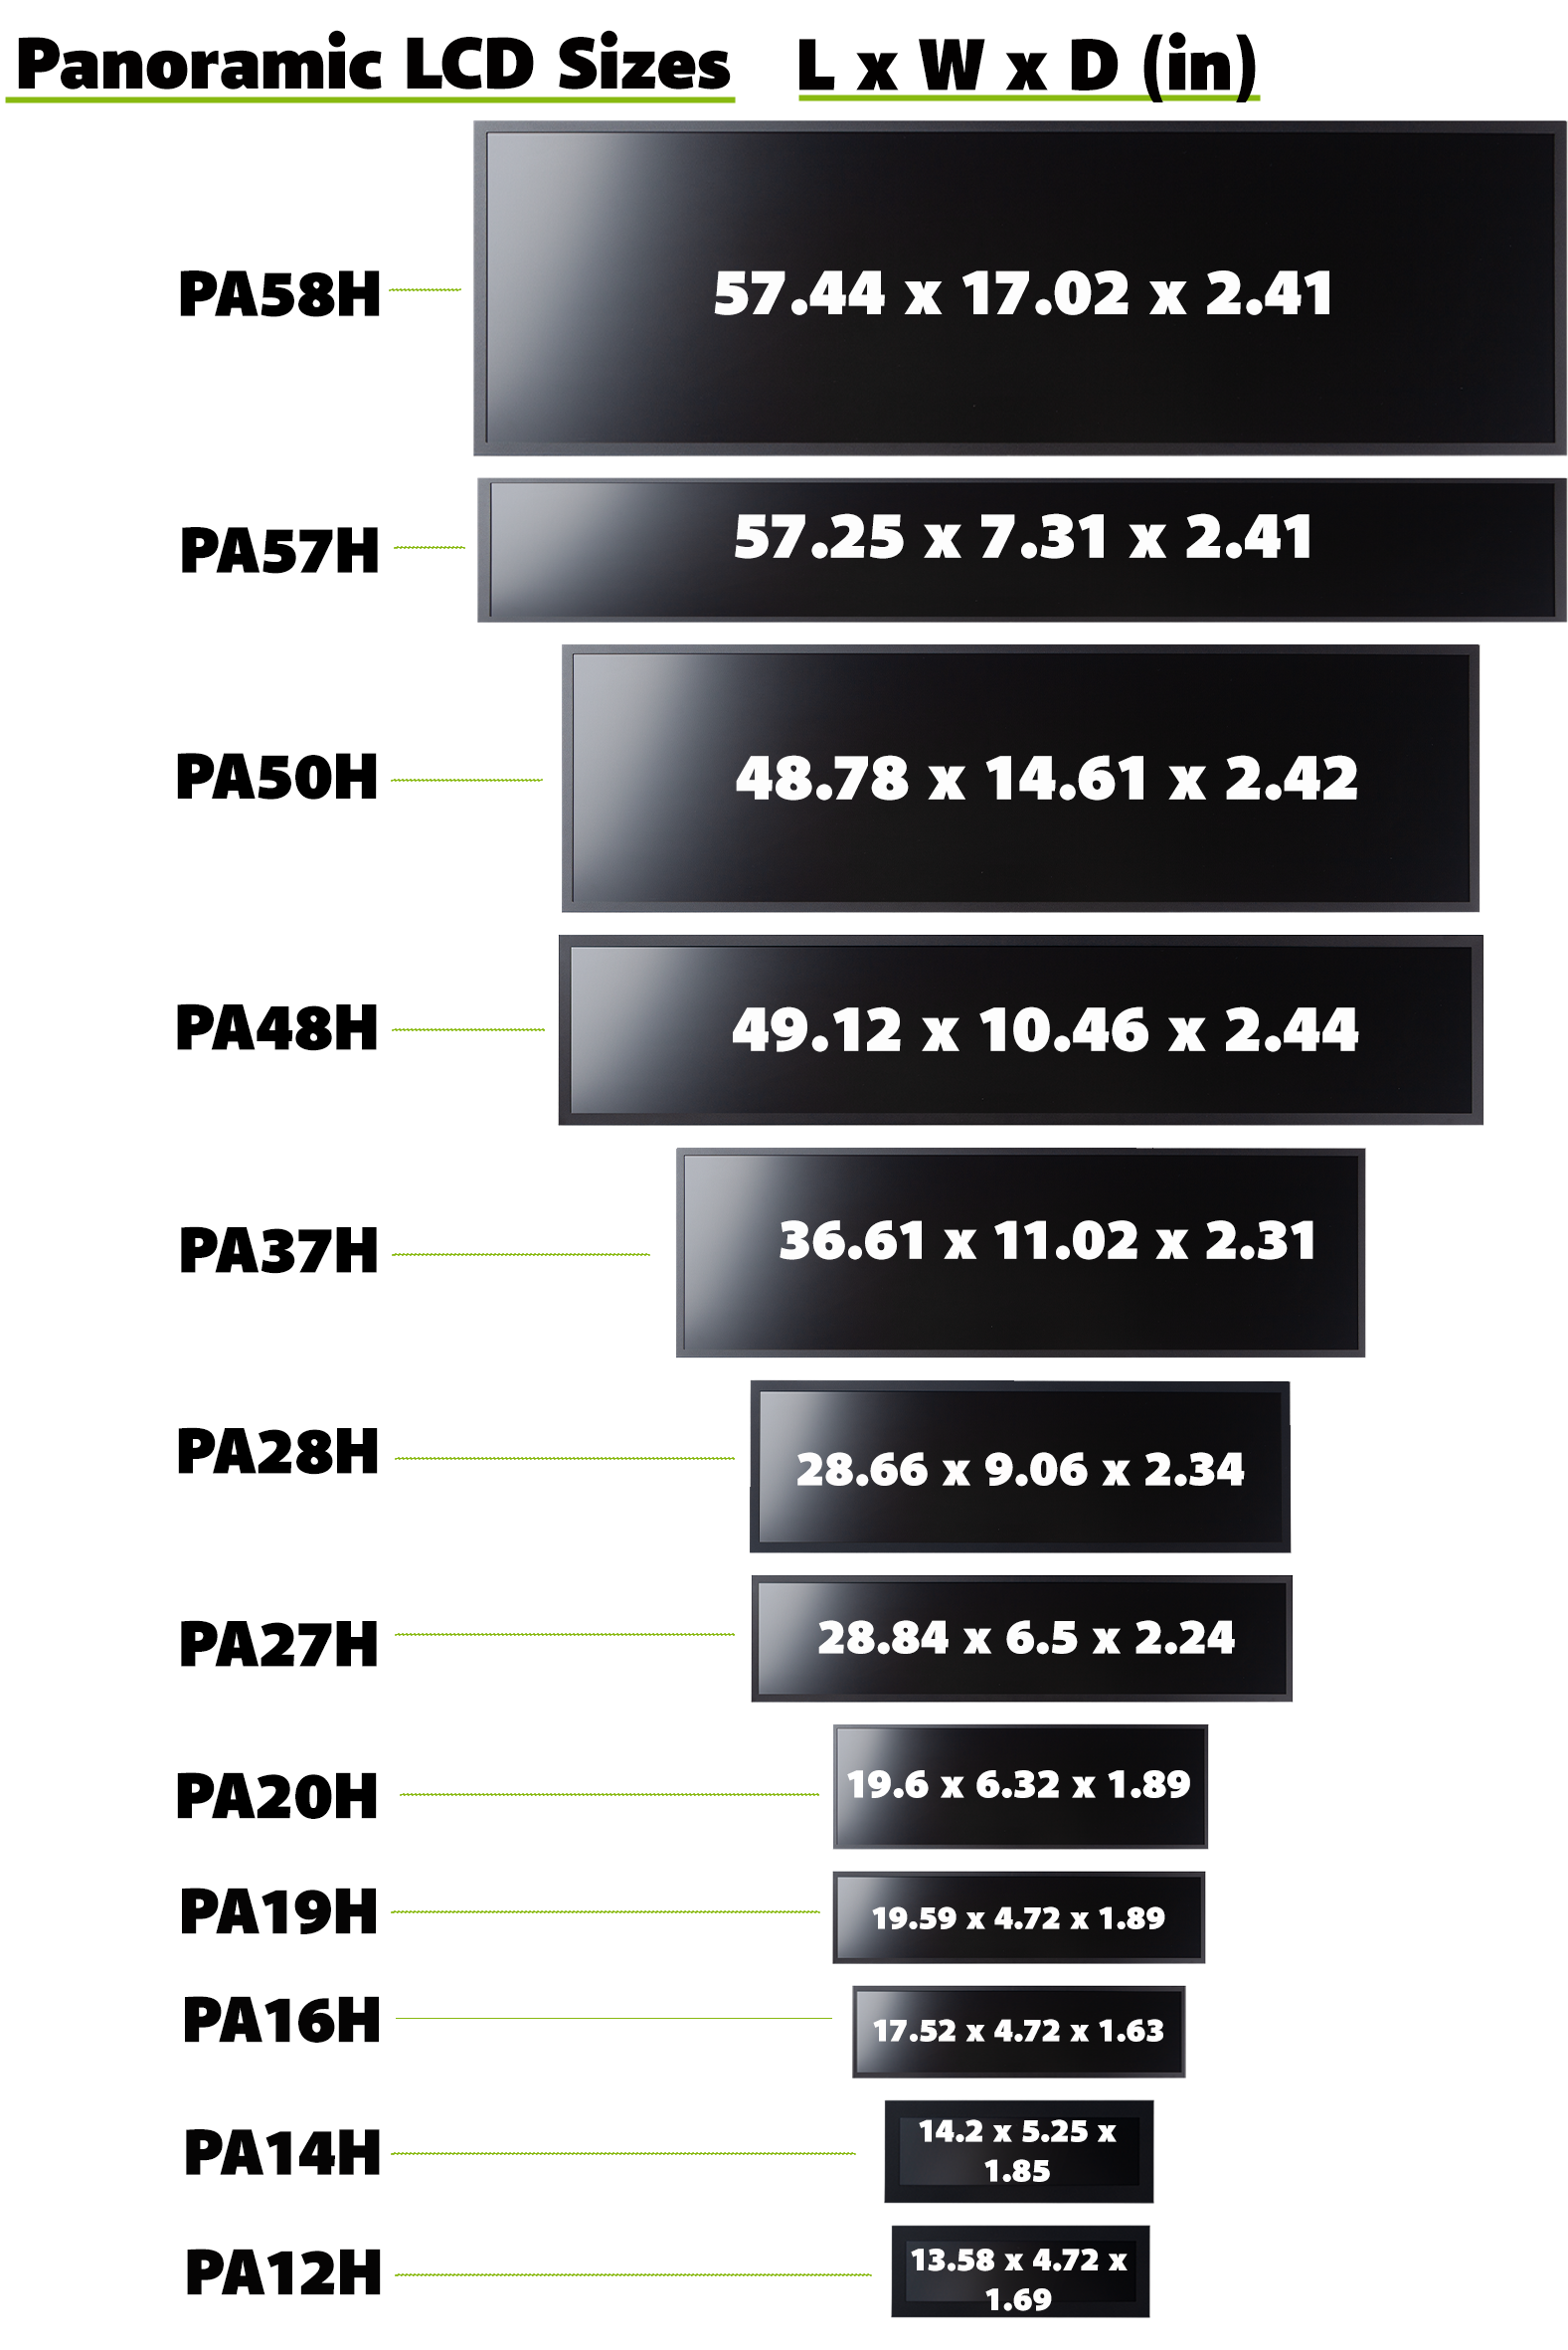 Panoramic Stretch LCD Display Sizes